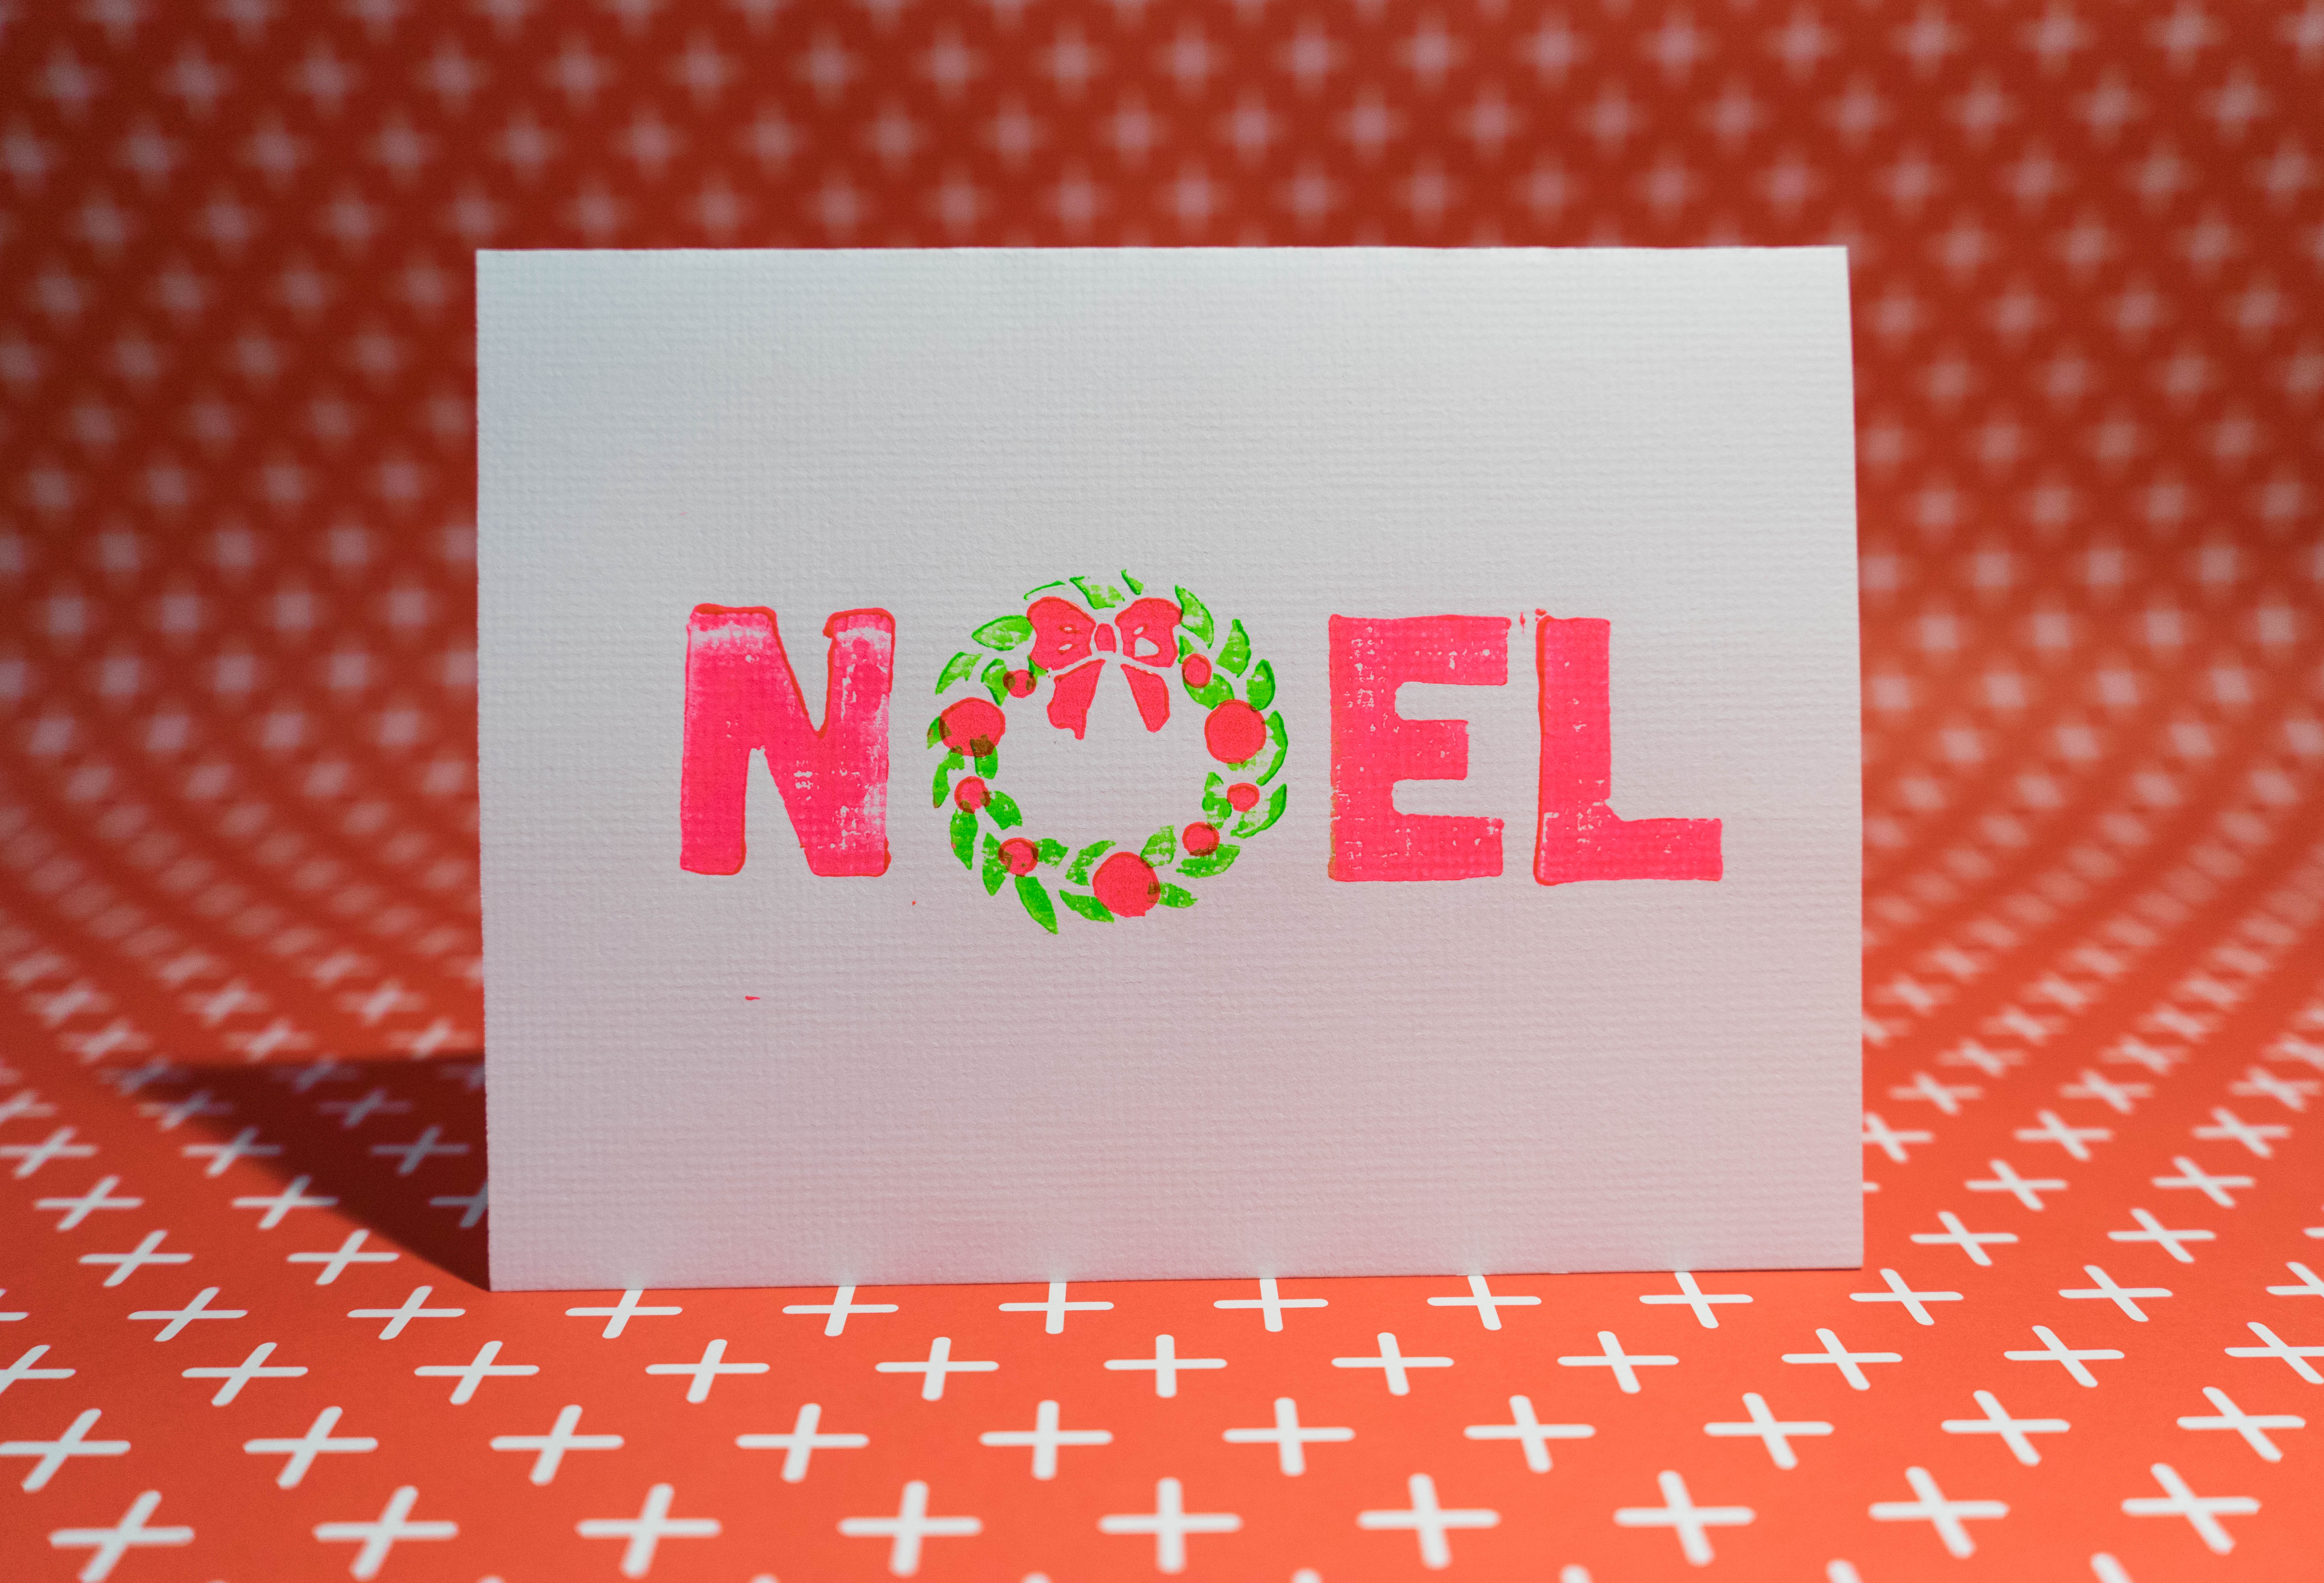 Christmas Cards 2018 - Making linocut printed cards